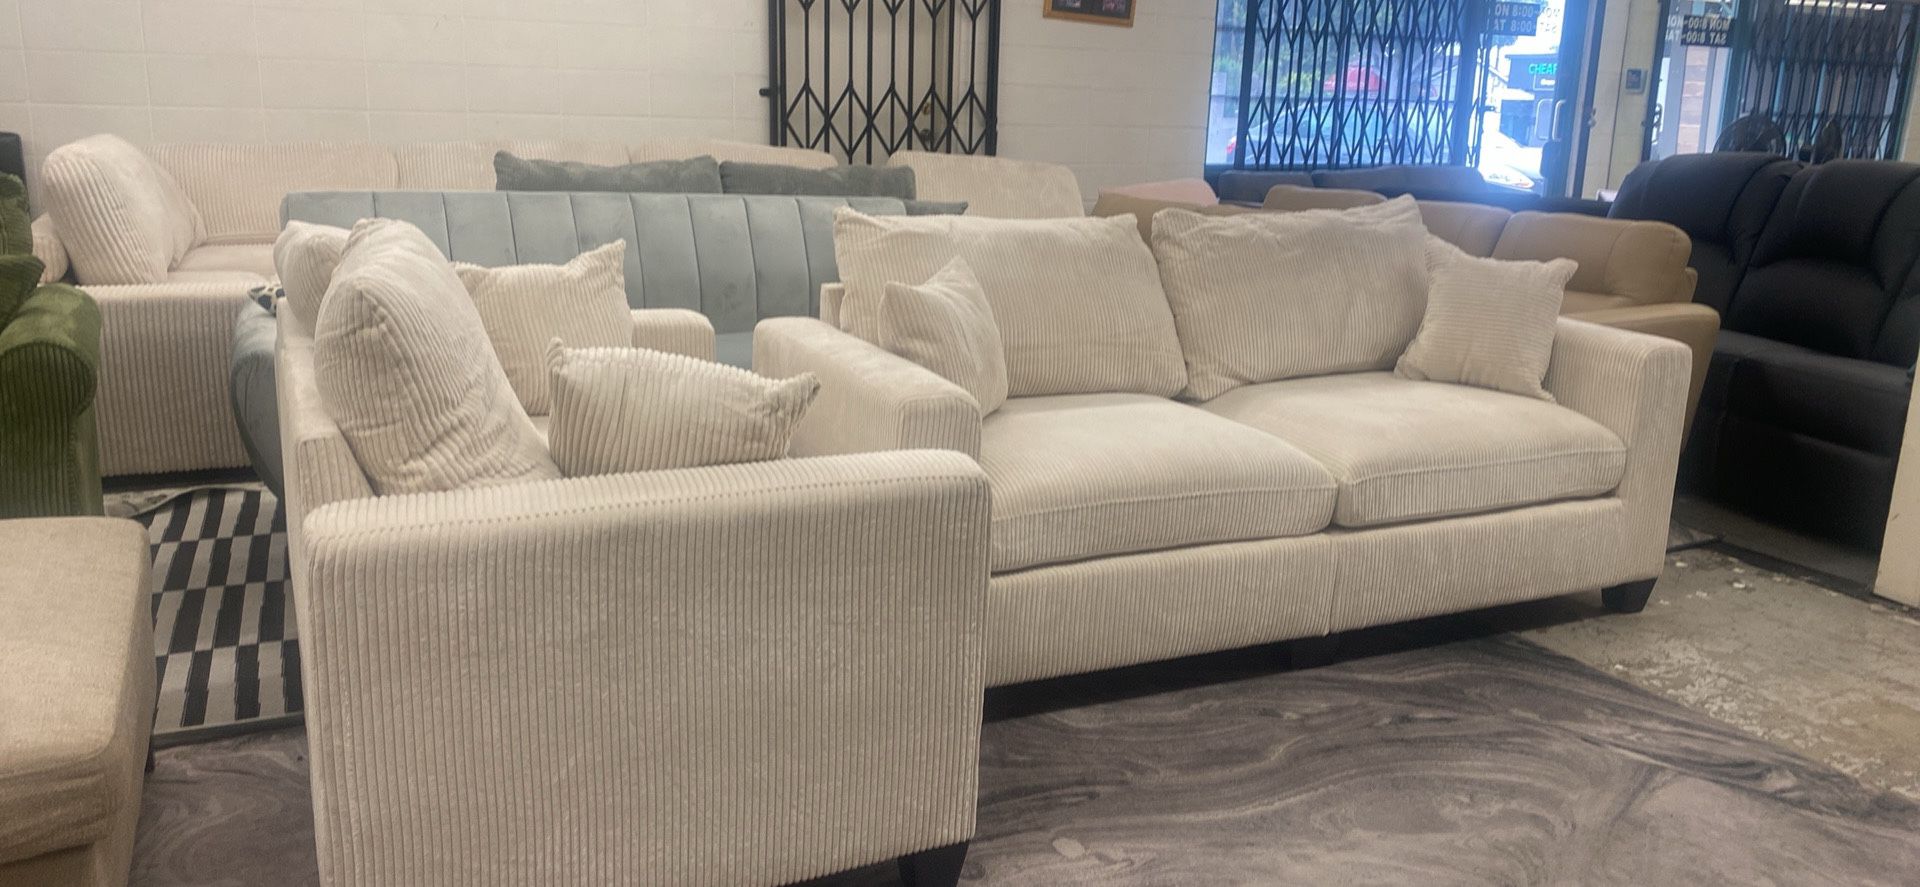 New Off White Corduroy Couch And Love  Seat Set / Free Delivery 